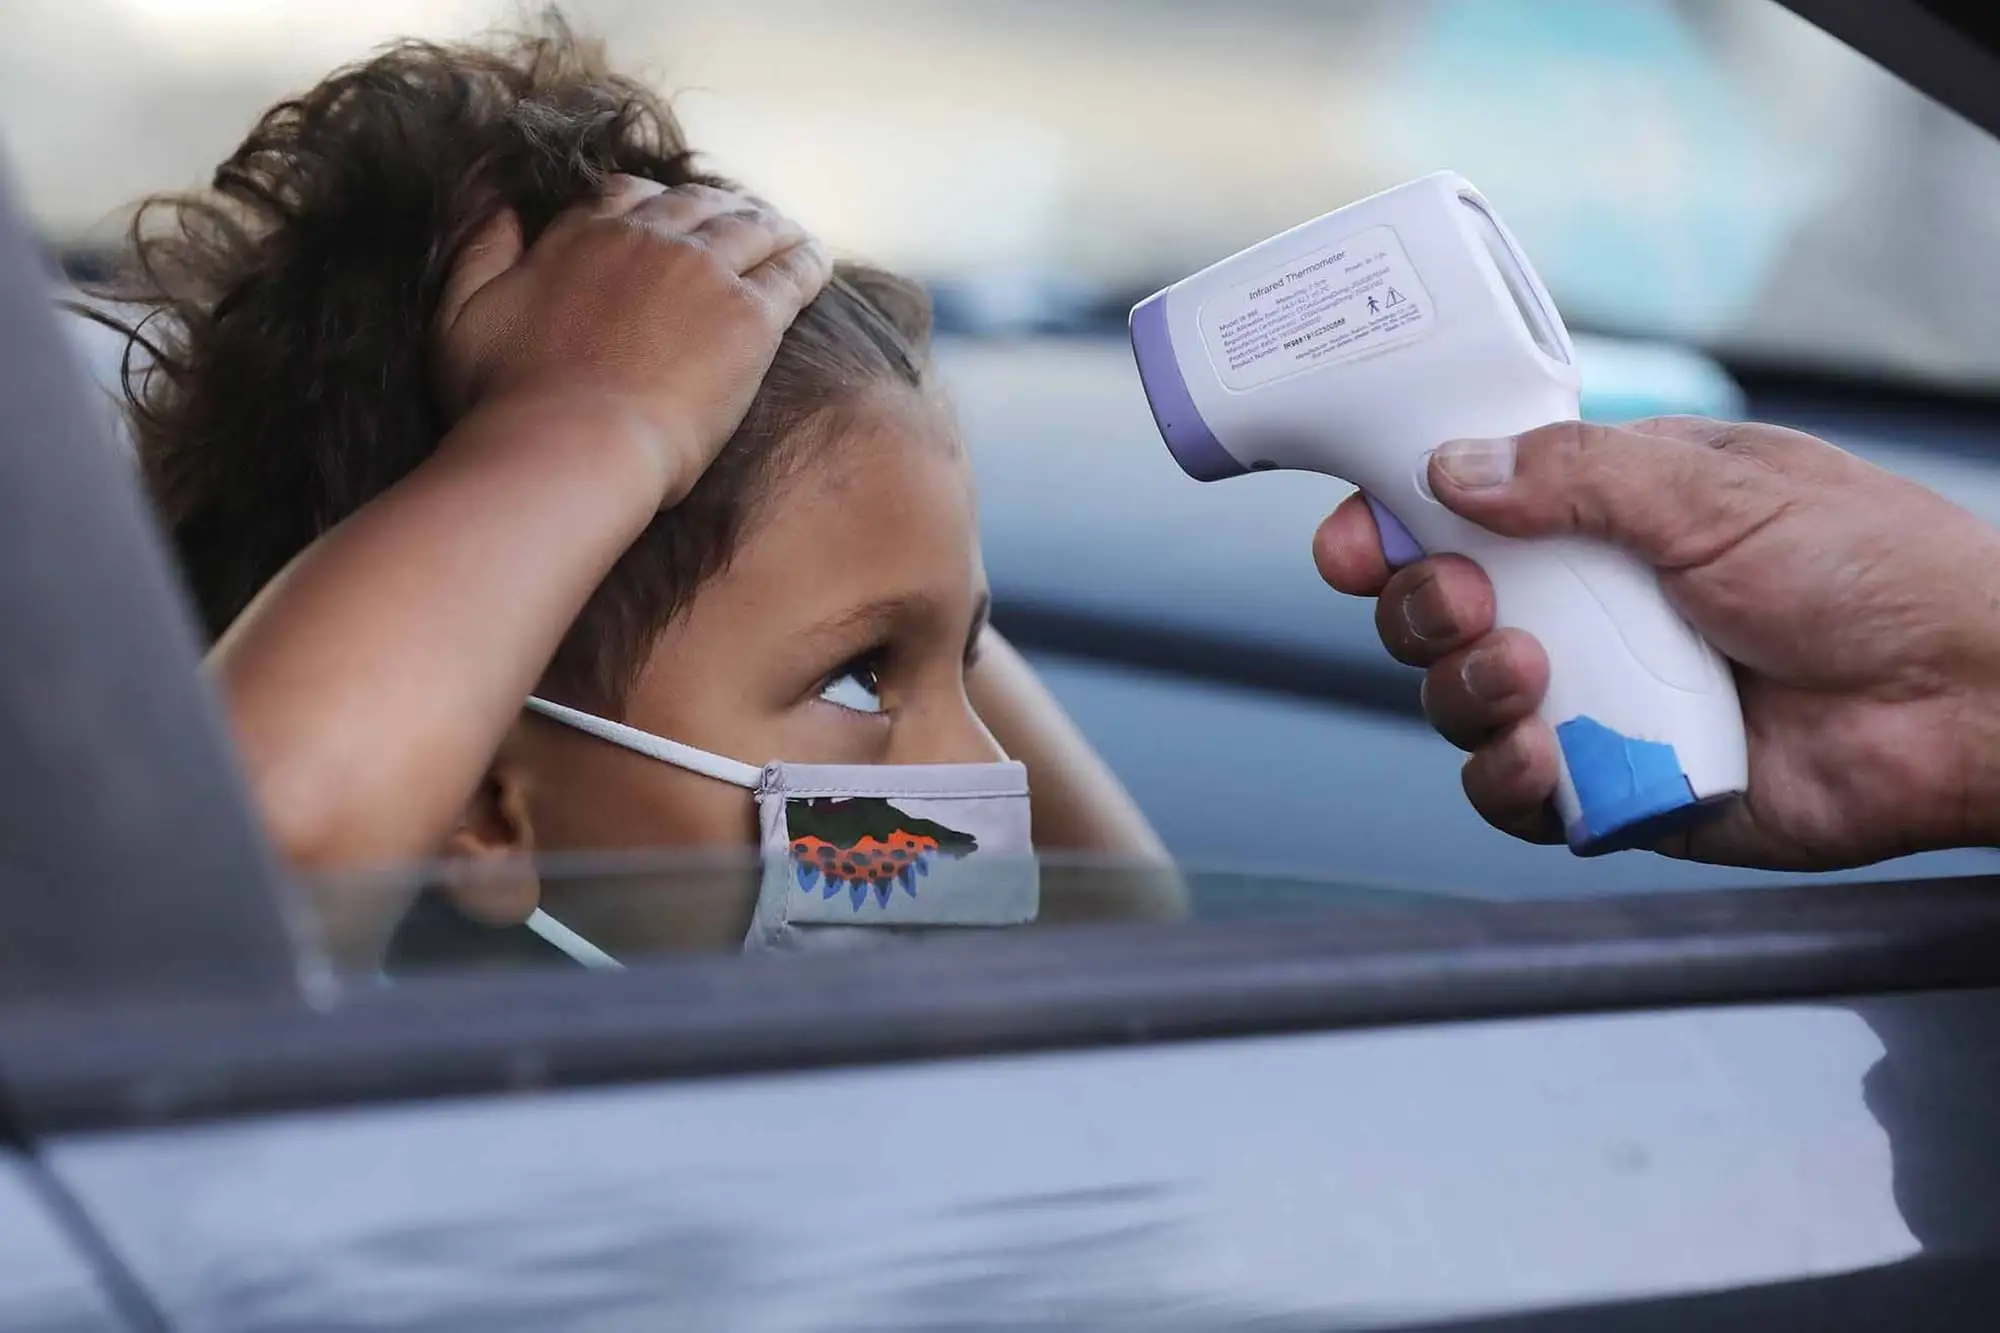 A young student inside a car wearing a medical mask pulls their hair back as a hand with a thermometer is pointed to their head.